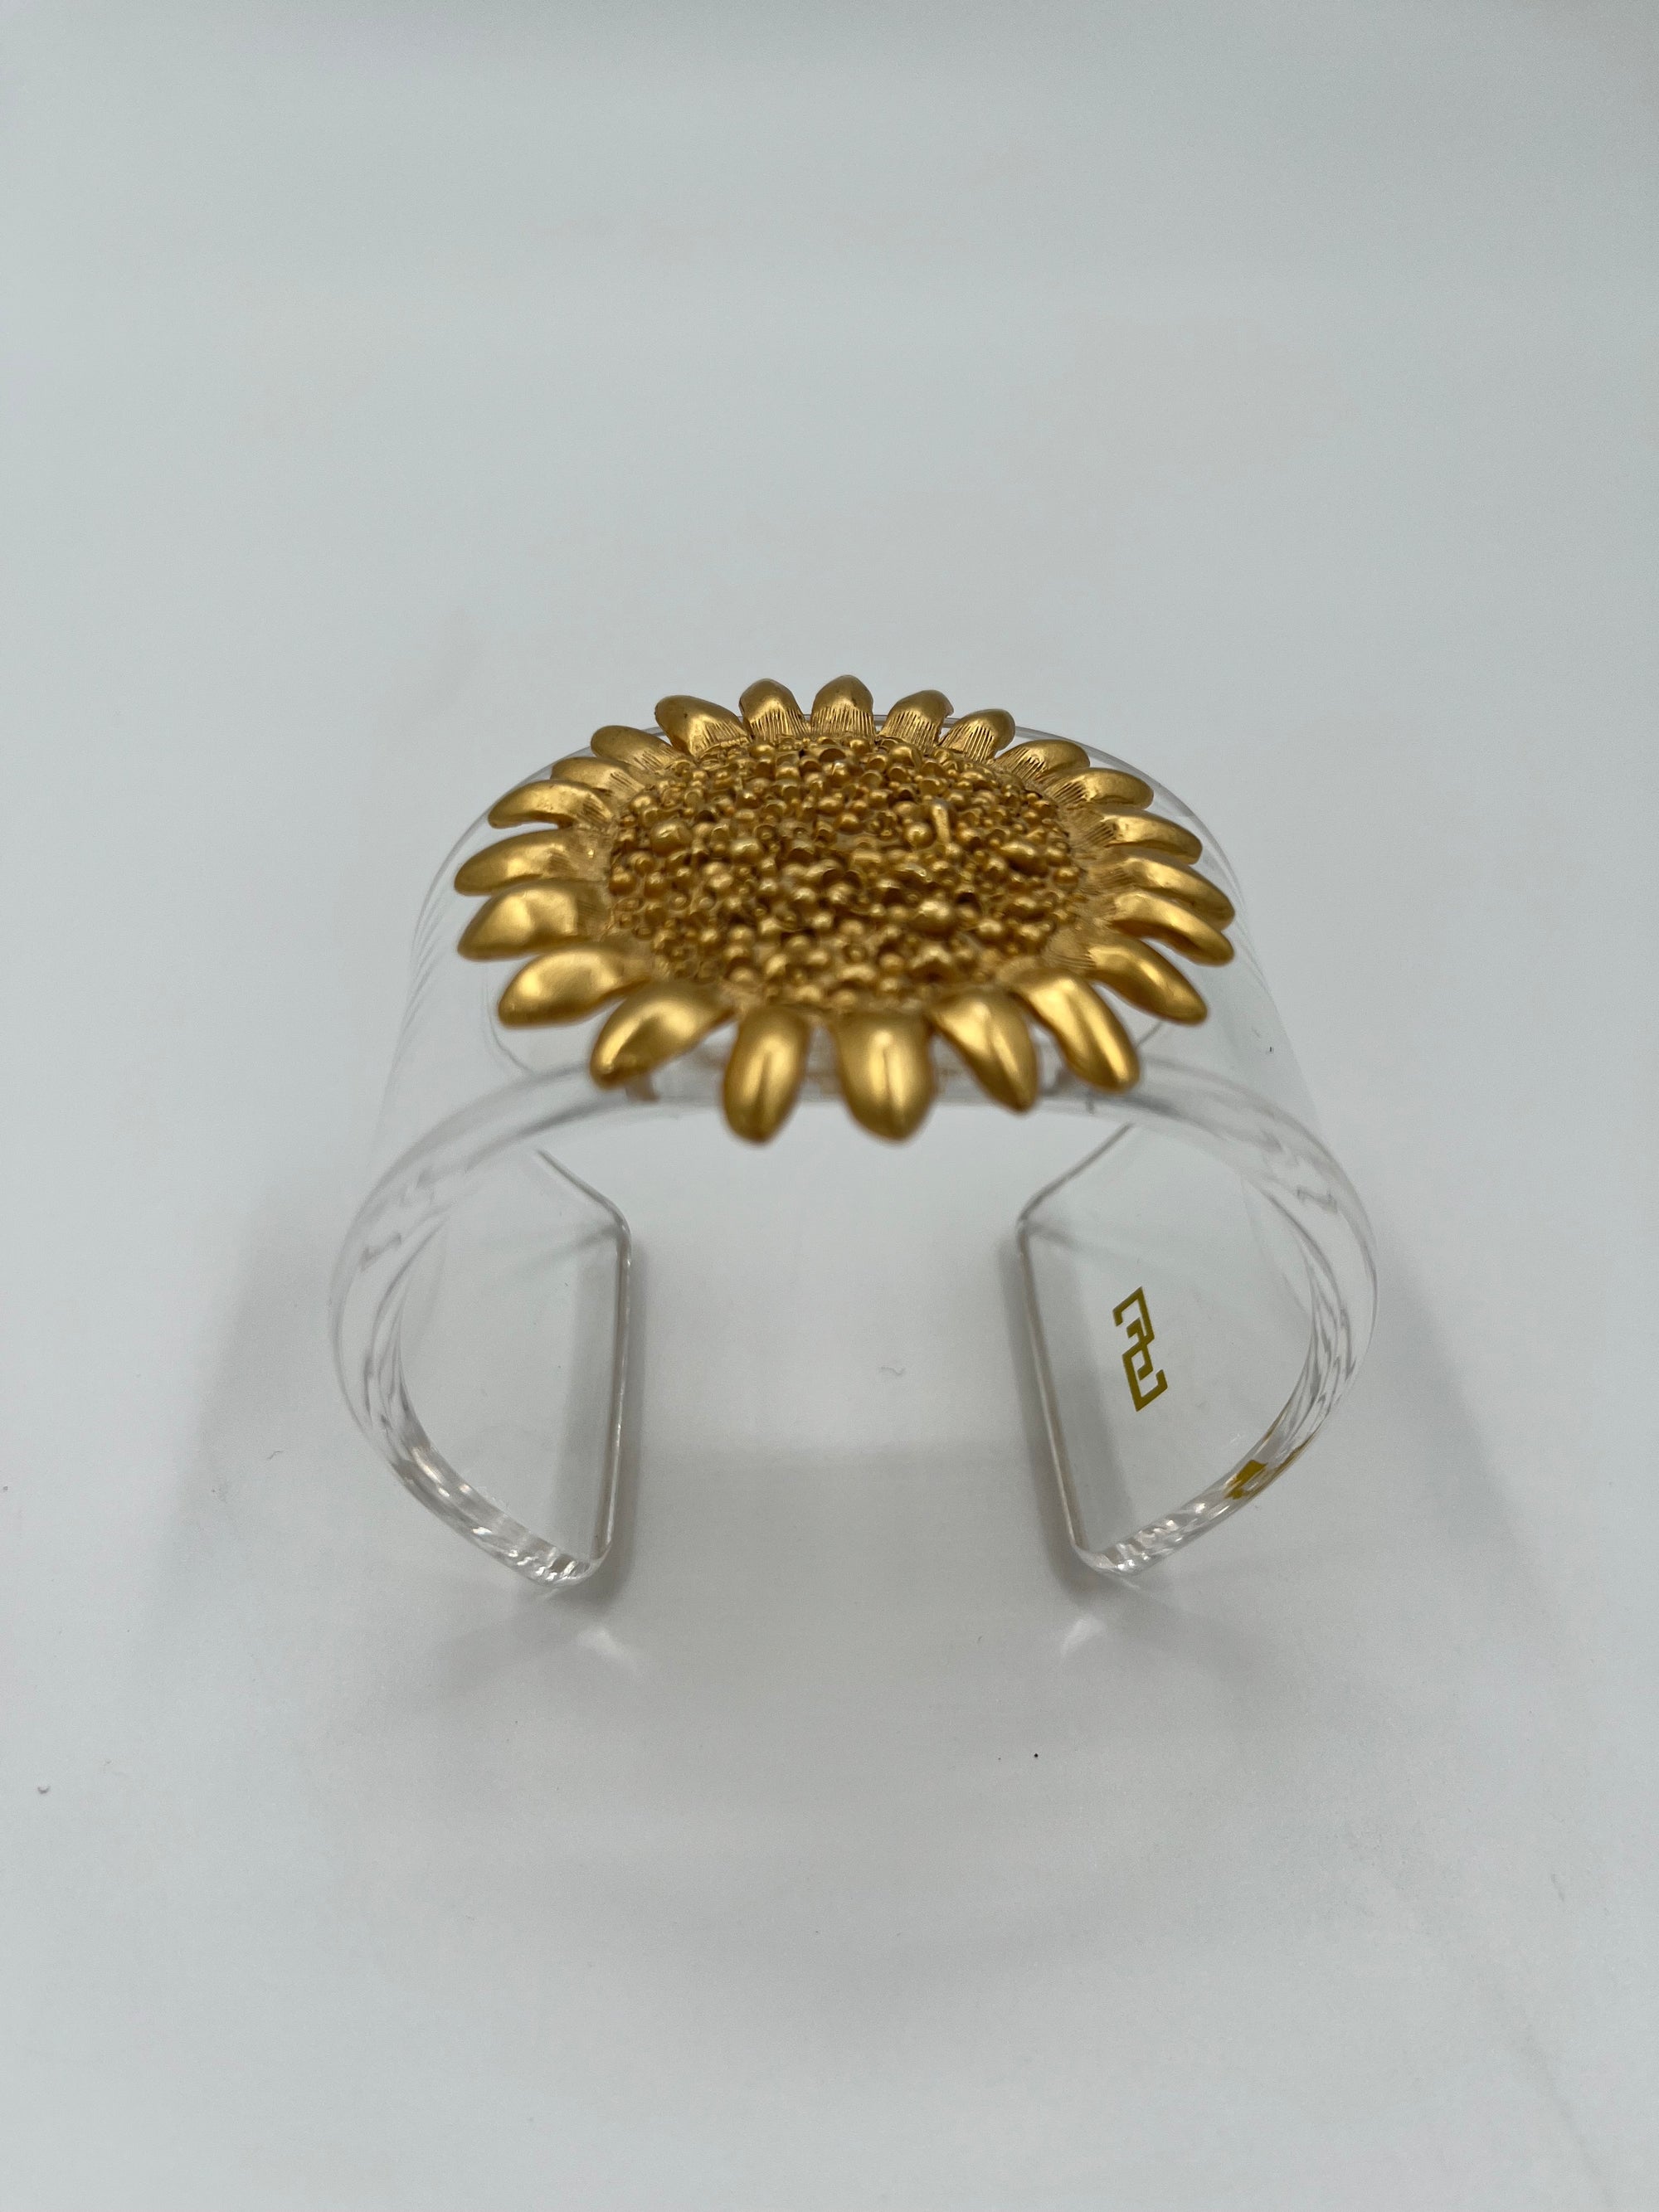 Acrylic Cuff with Vintage Sunflower Brooch